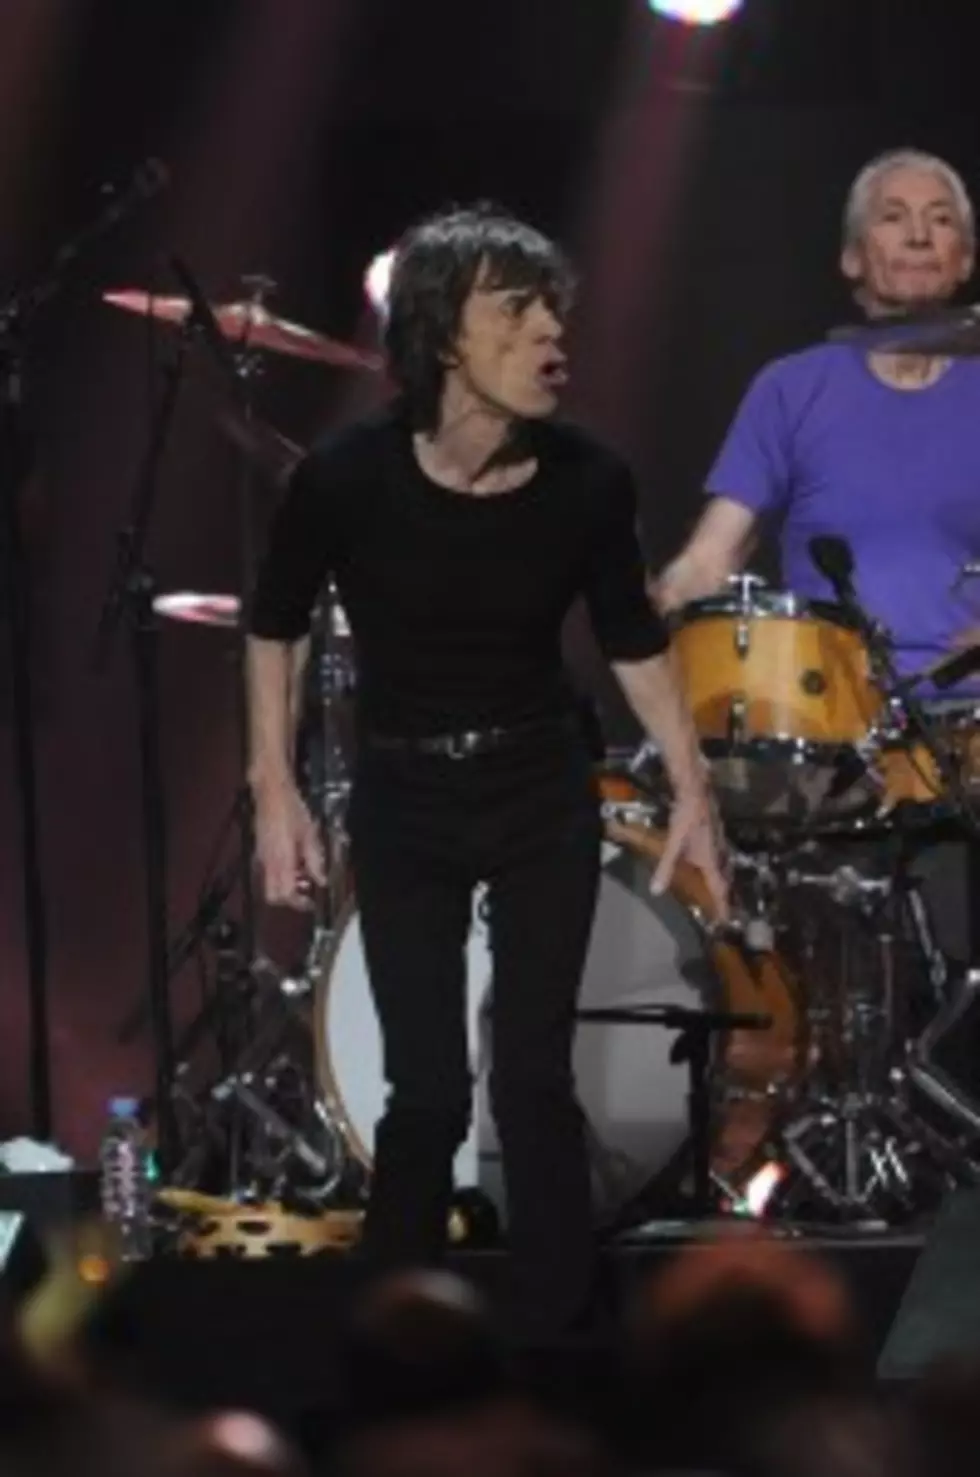 Mick Jagger’s Lame Joke at 12 12 12 Concert – Was He Out of Line? [POLL]